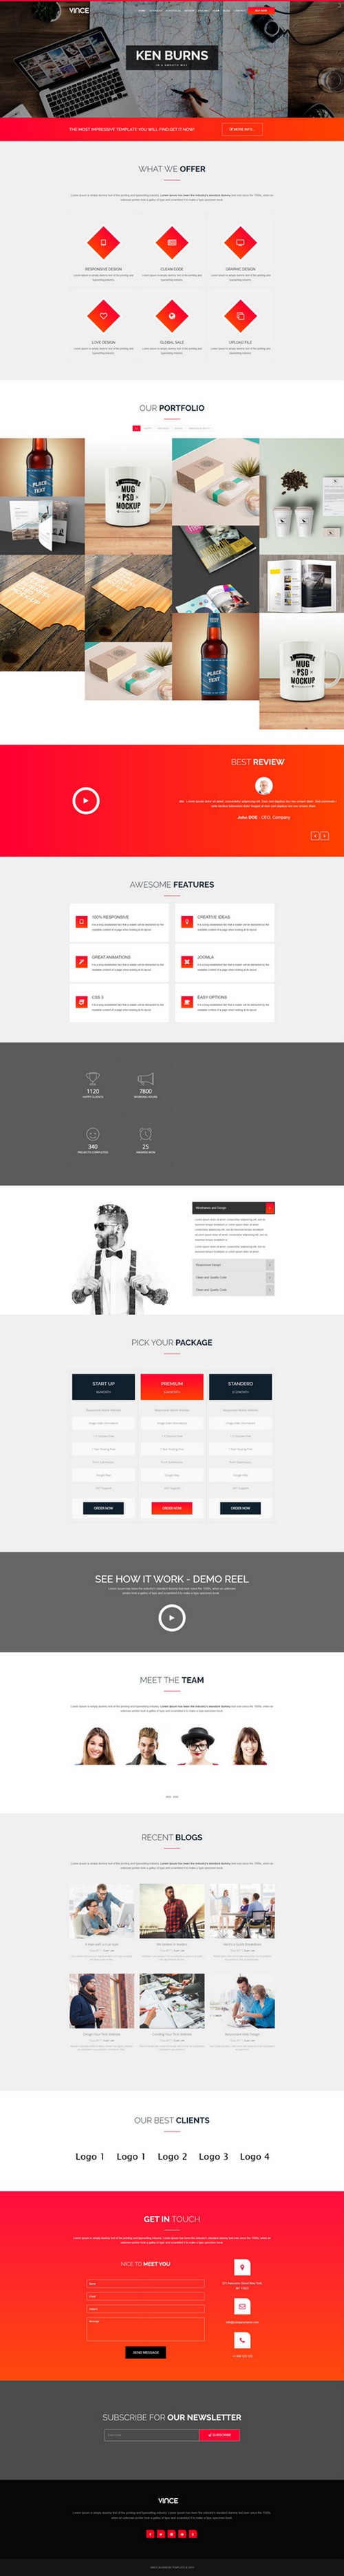 Vince - One Page & Multi Page Joomla 4 Template